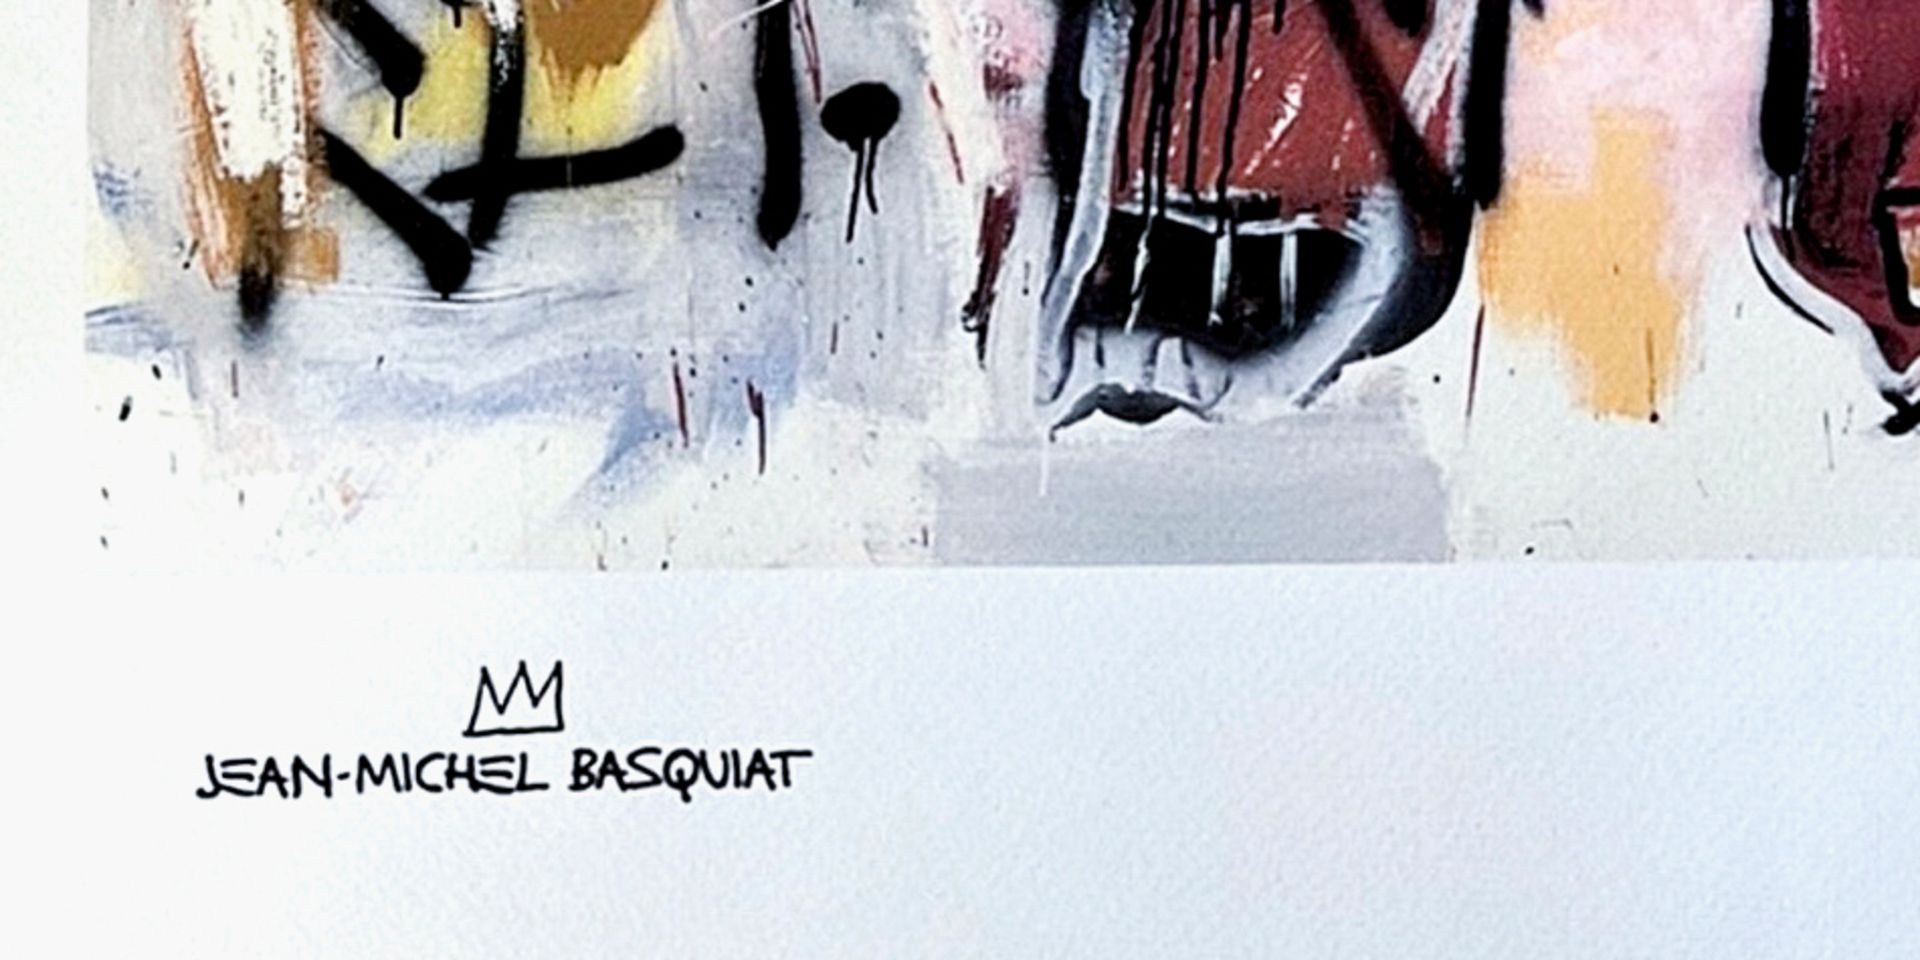 Jean-Michel Basquiat (1960-1988), Lithograph - Image 2 of 3